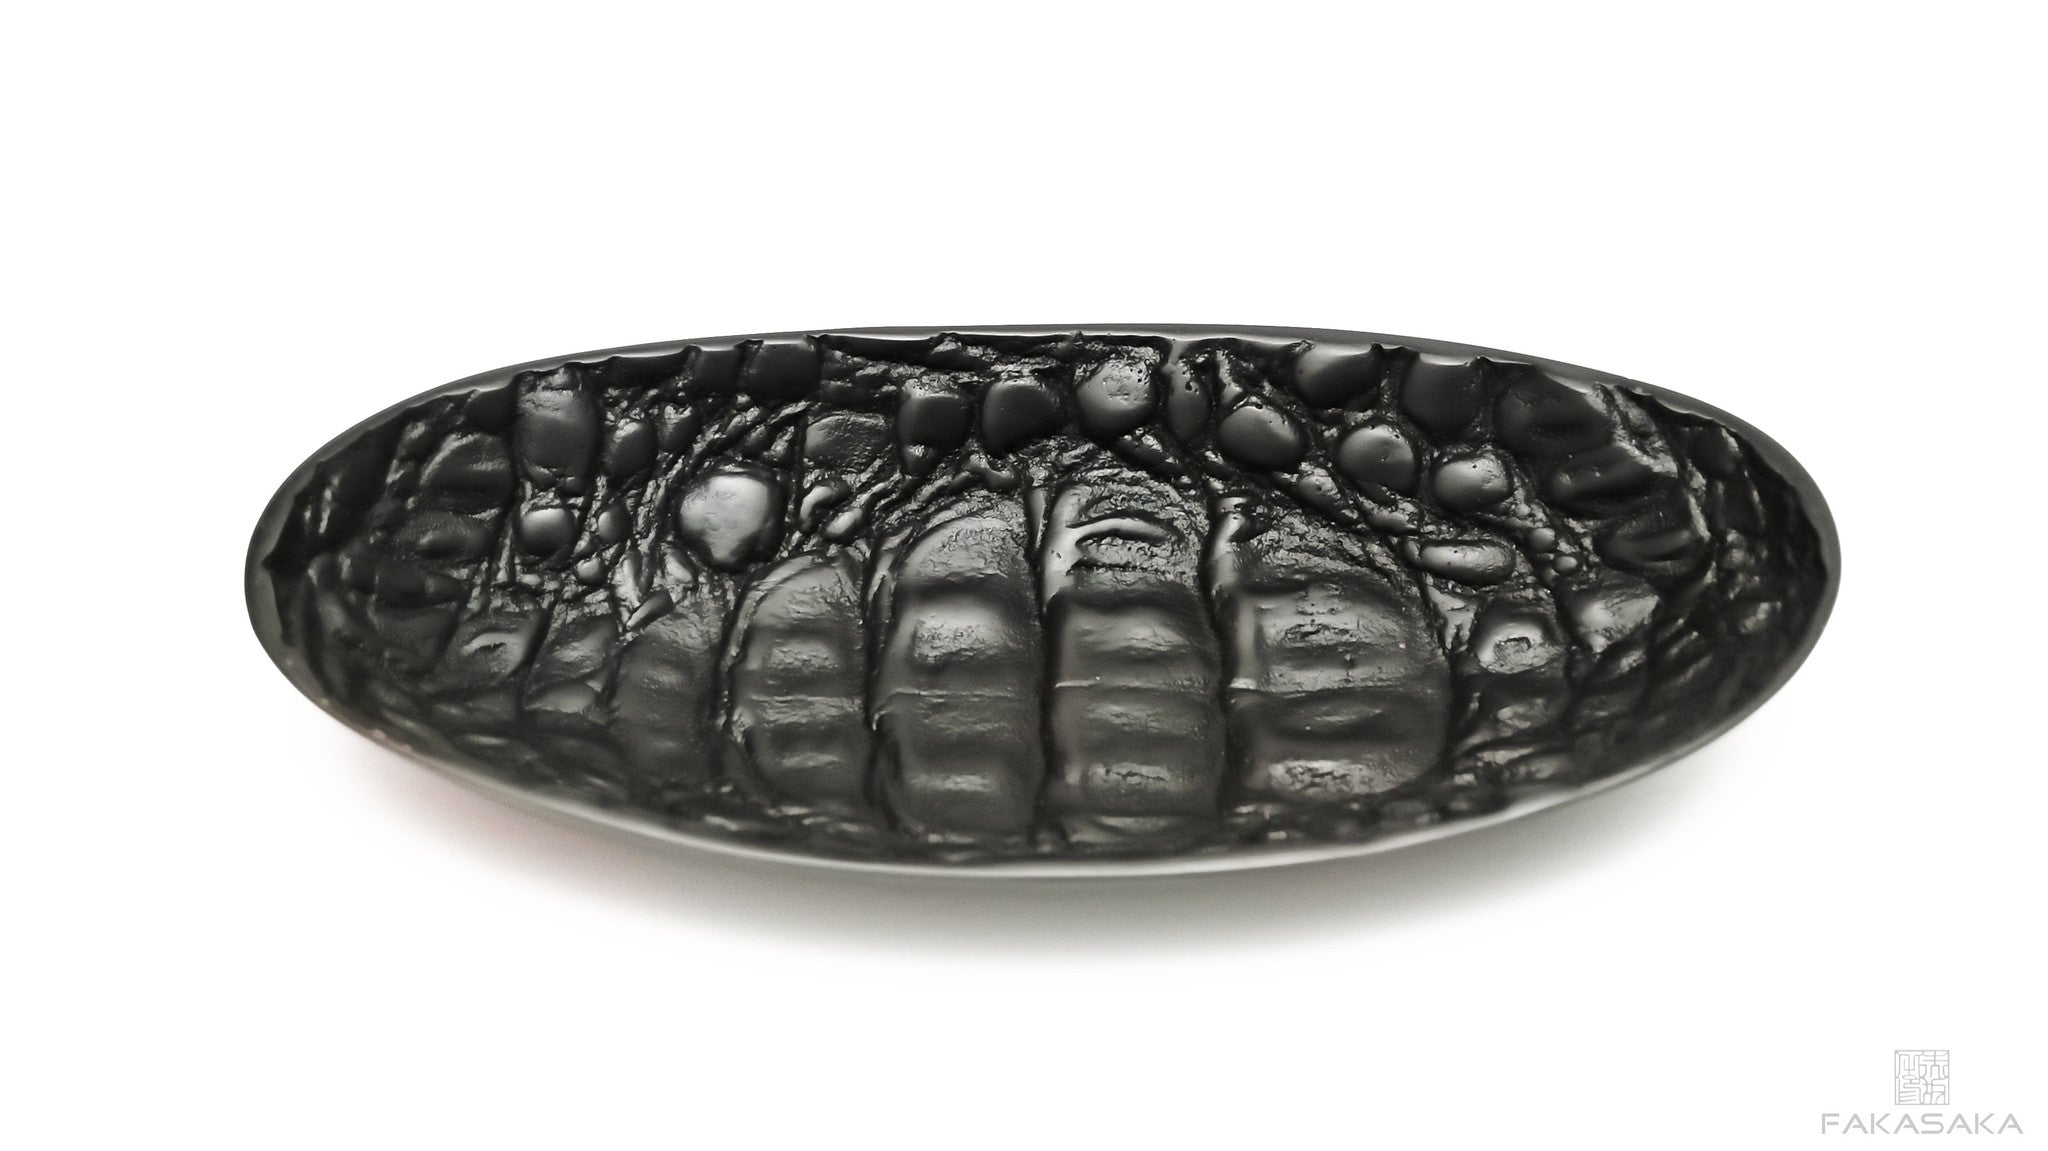 POLLY JEAN<br><br>SMALL TRAY / SMALL BOWL / ASHTRAY / CARD HOLDER / PEN HOLDER<br><br> BLACK BRONZE